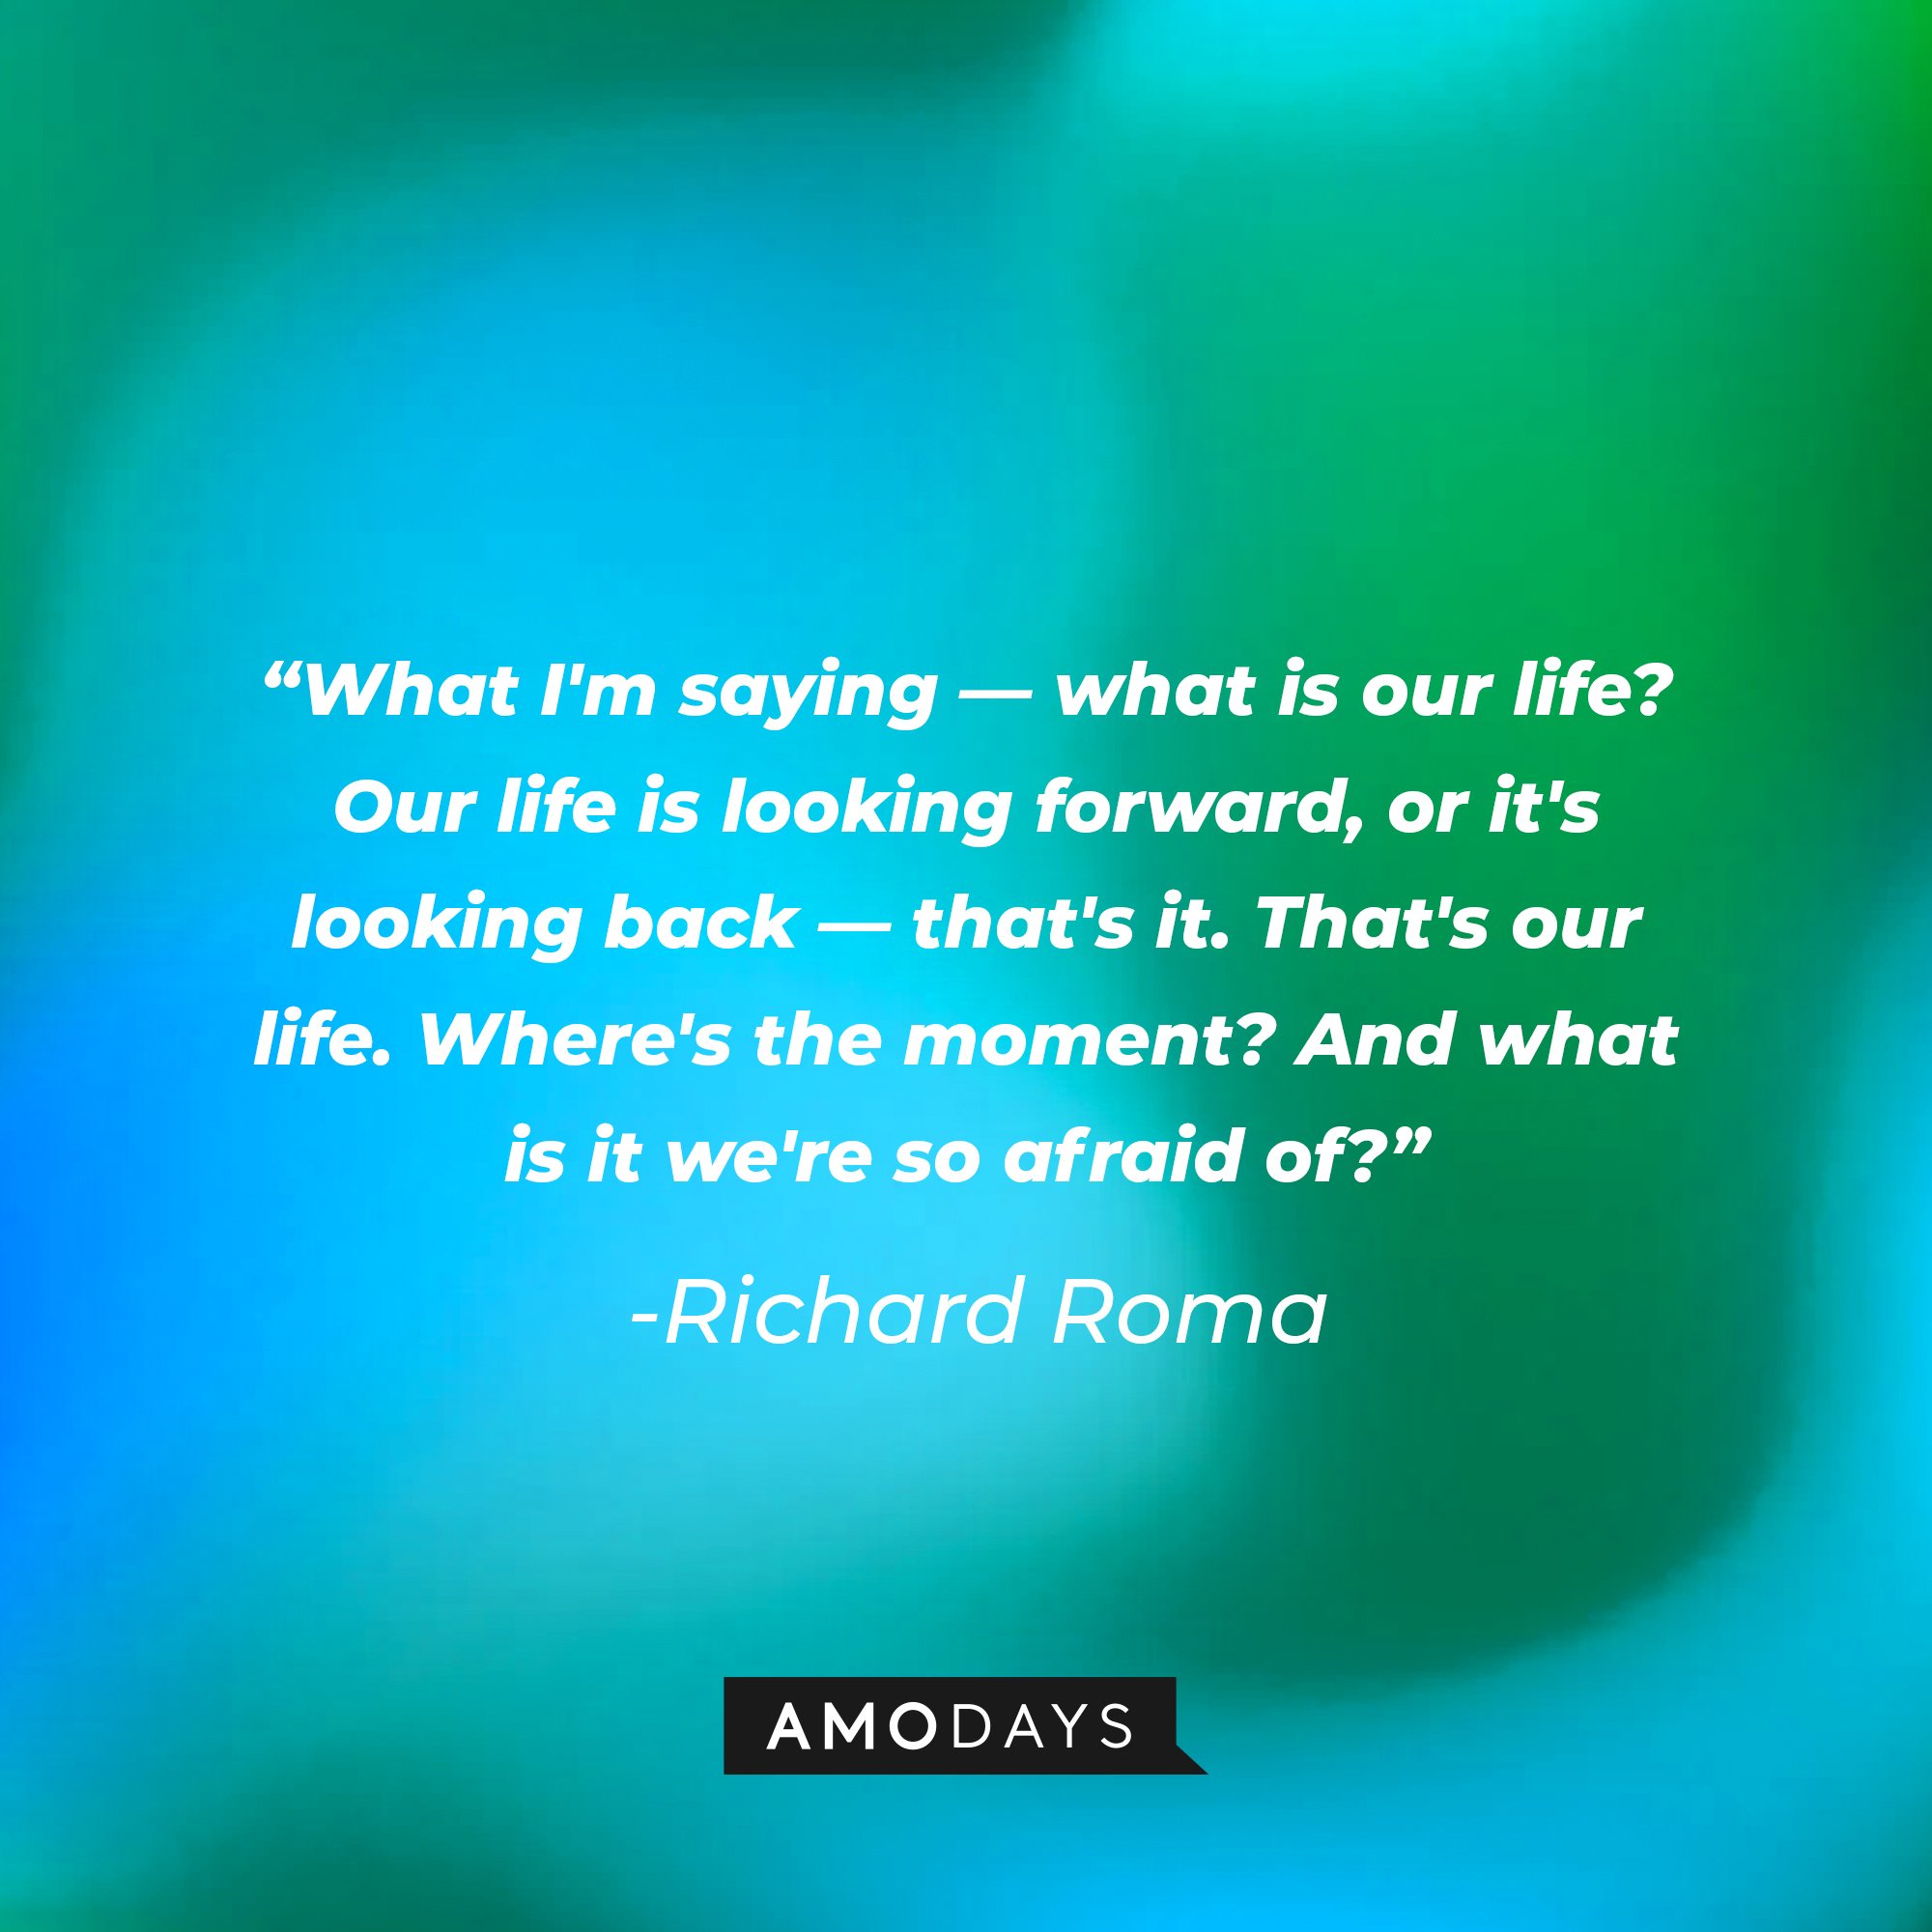 Richard Roma's quote: "What I'm saying — what is our life? Our life is looking forward, or it's looking back — that's it. That's our life. Where's the moment? And what is it we're so afraid of?" | Image: AmoDays